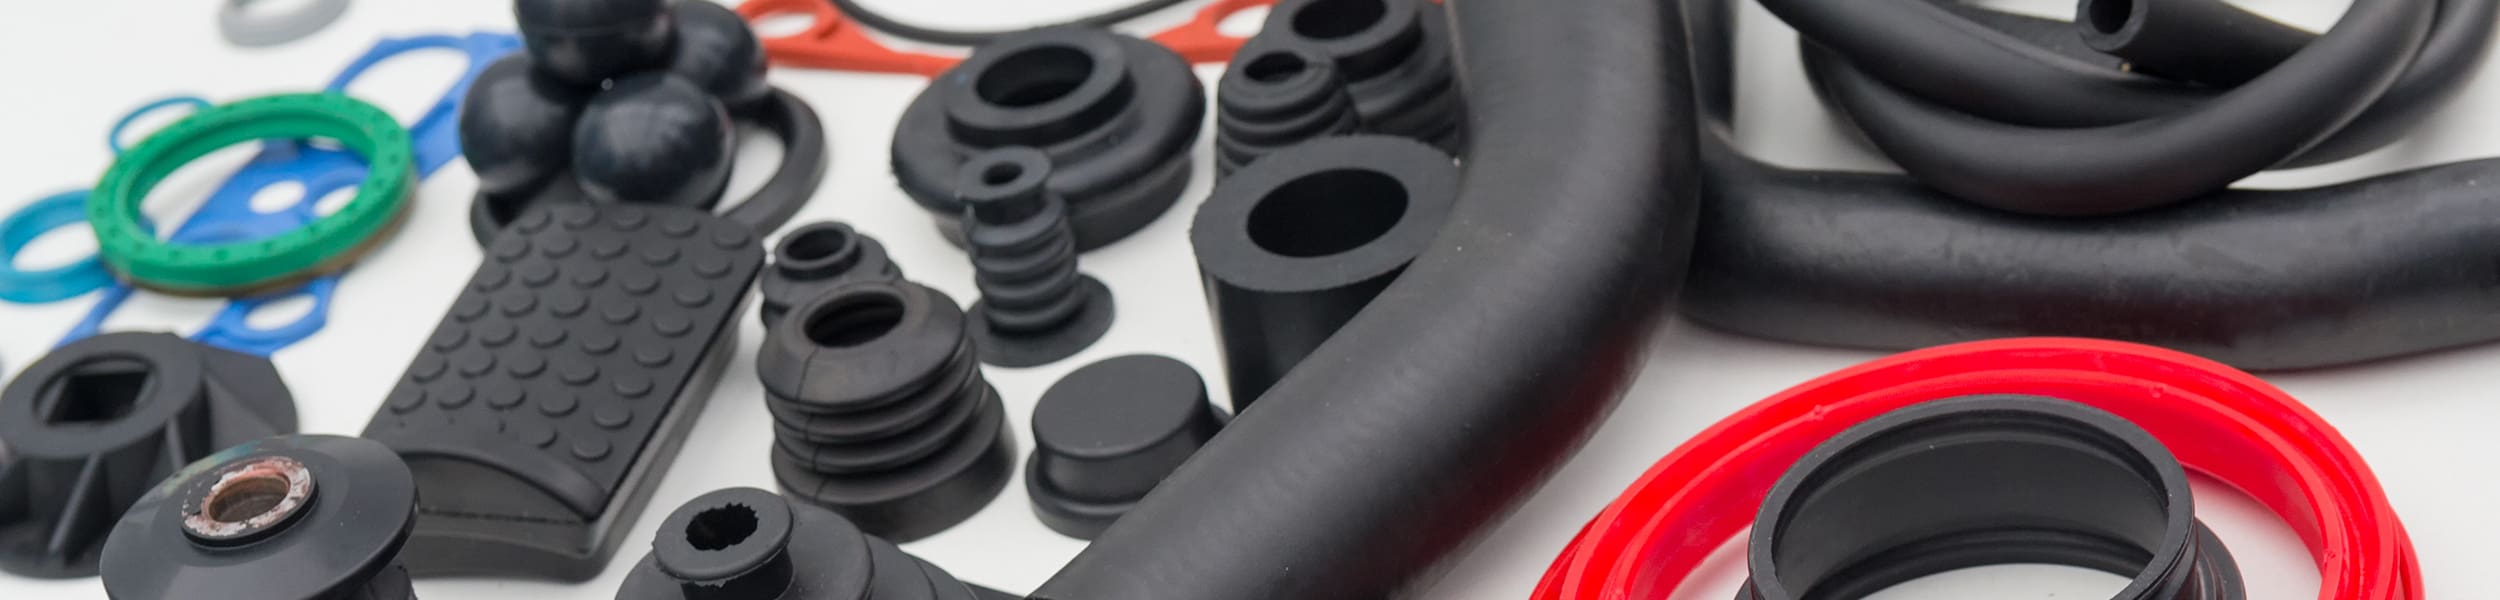 Aurora Material Solutions offers SBS, SEBS, flexible PVC, TPE: Thermoplastic Elastomers & TPR: Thermoplastic Rubber for seal & gasket applications.